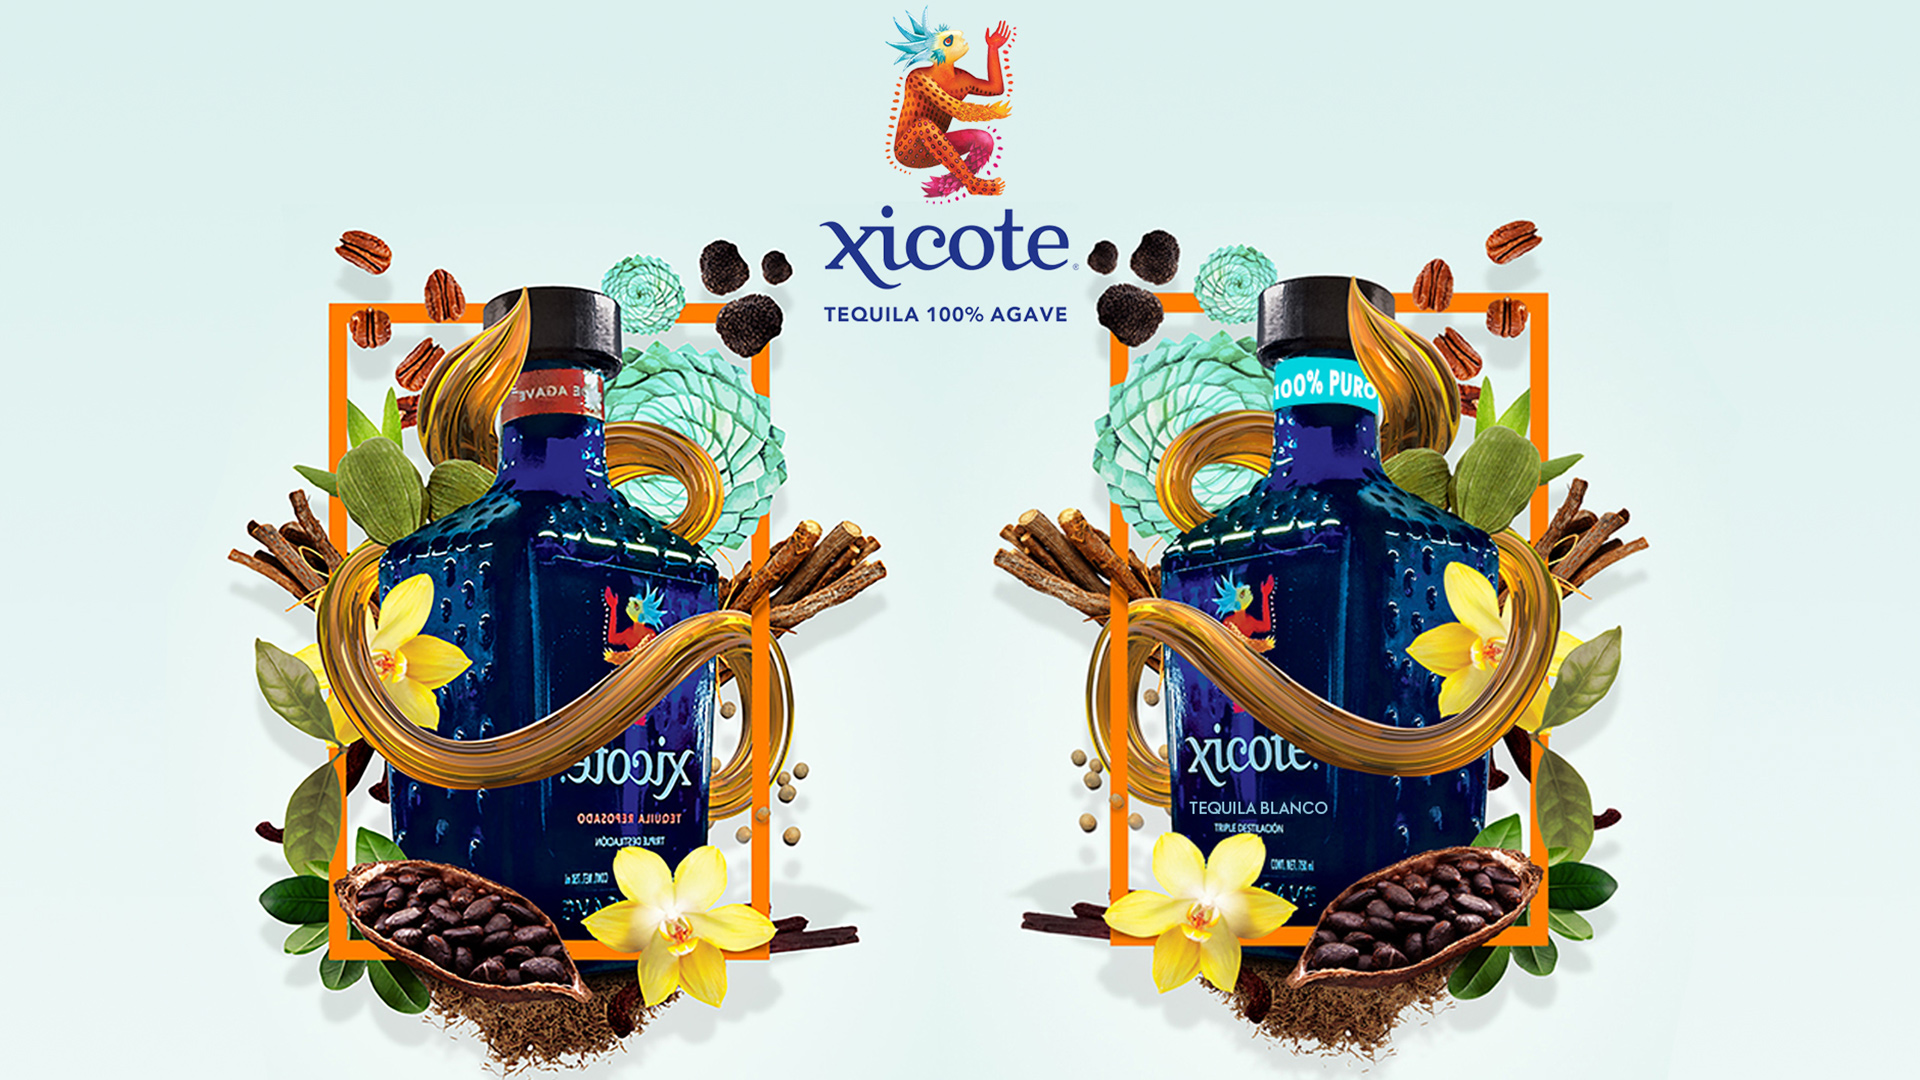 TEQUILA XICOTE background